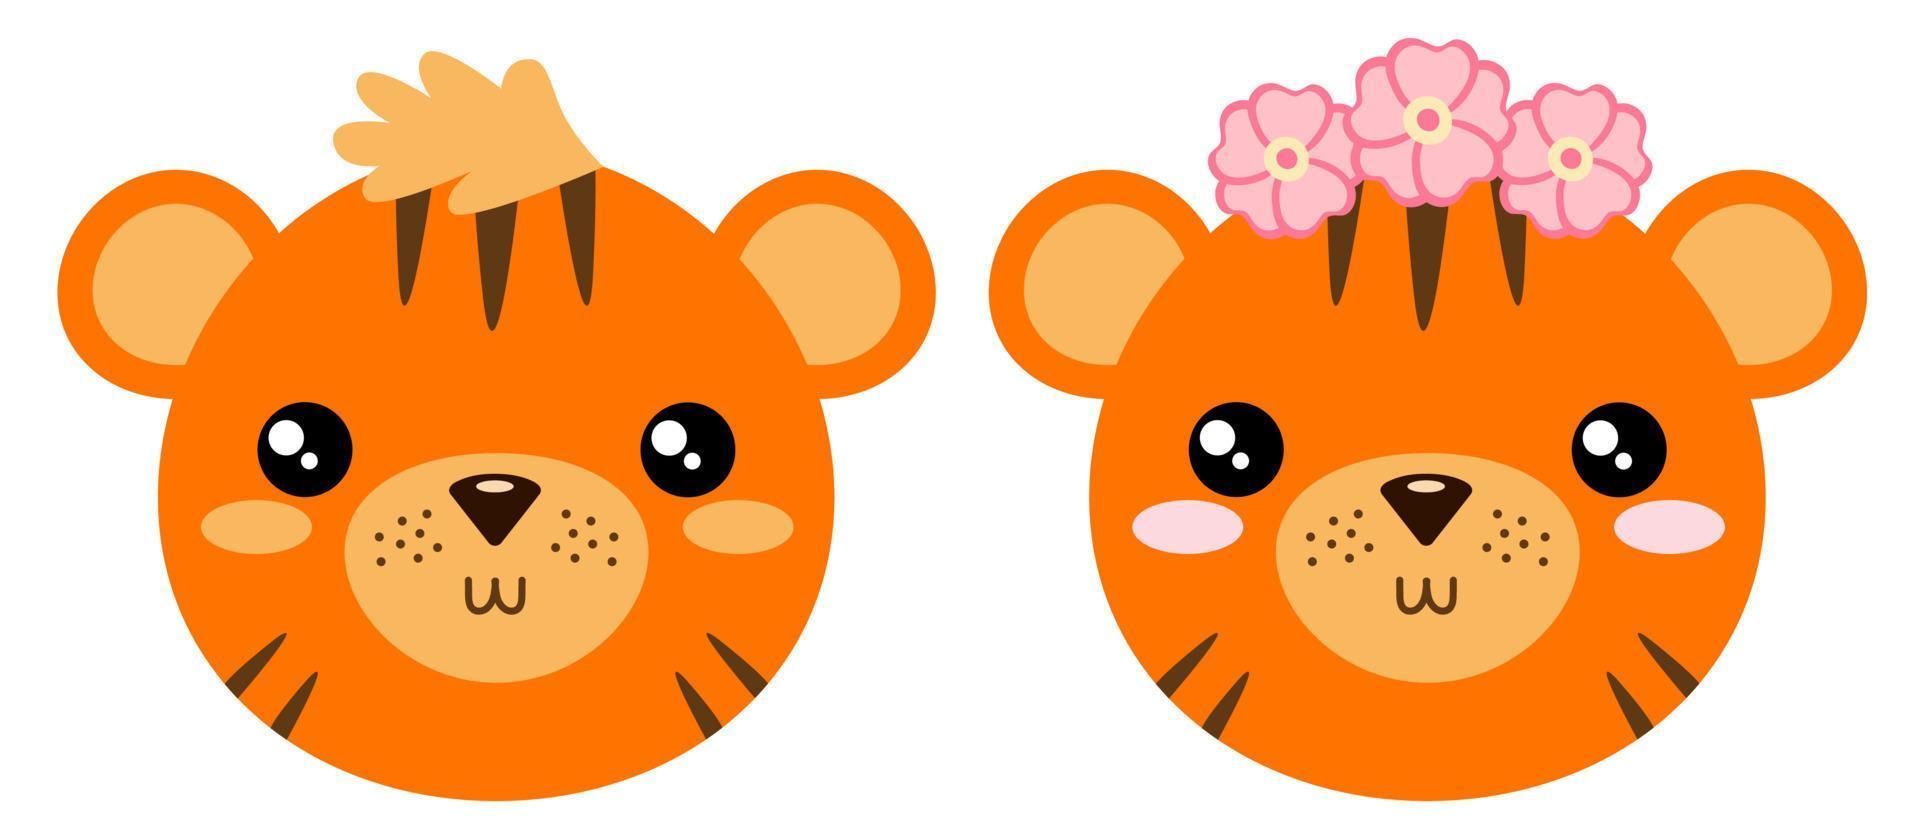 Baby tigers boy and girl. Vector illustration of the faces of cute baby animals. Design for children's print.